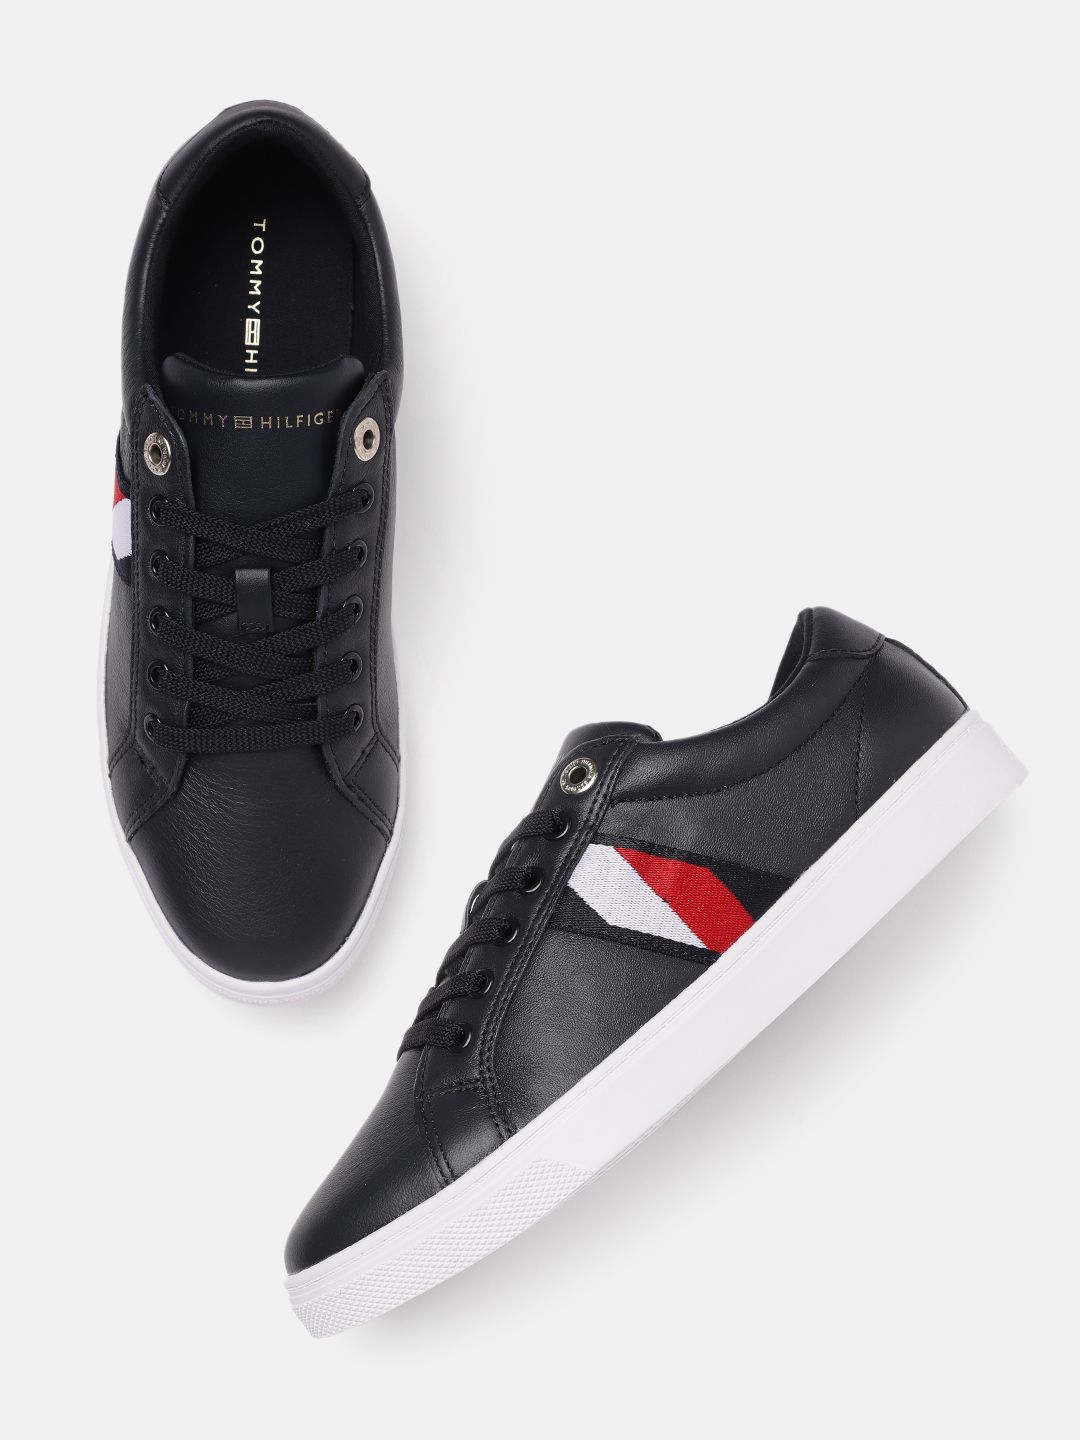 Tommy Hilfiger Women Navy Blue Leather Regular Sneakers With Brand Logo Applique Detail Price in India